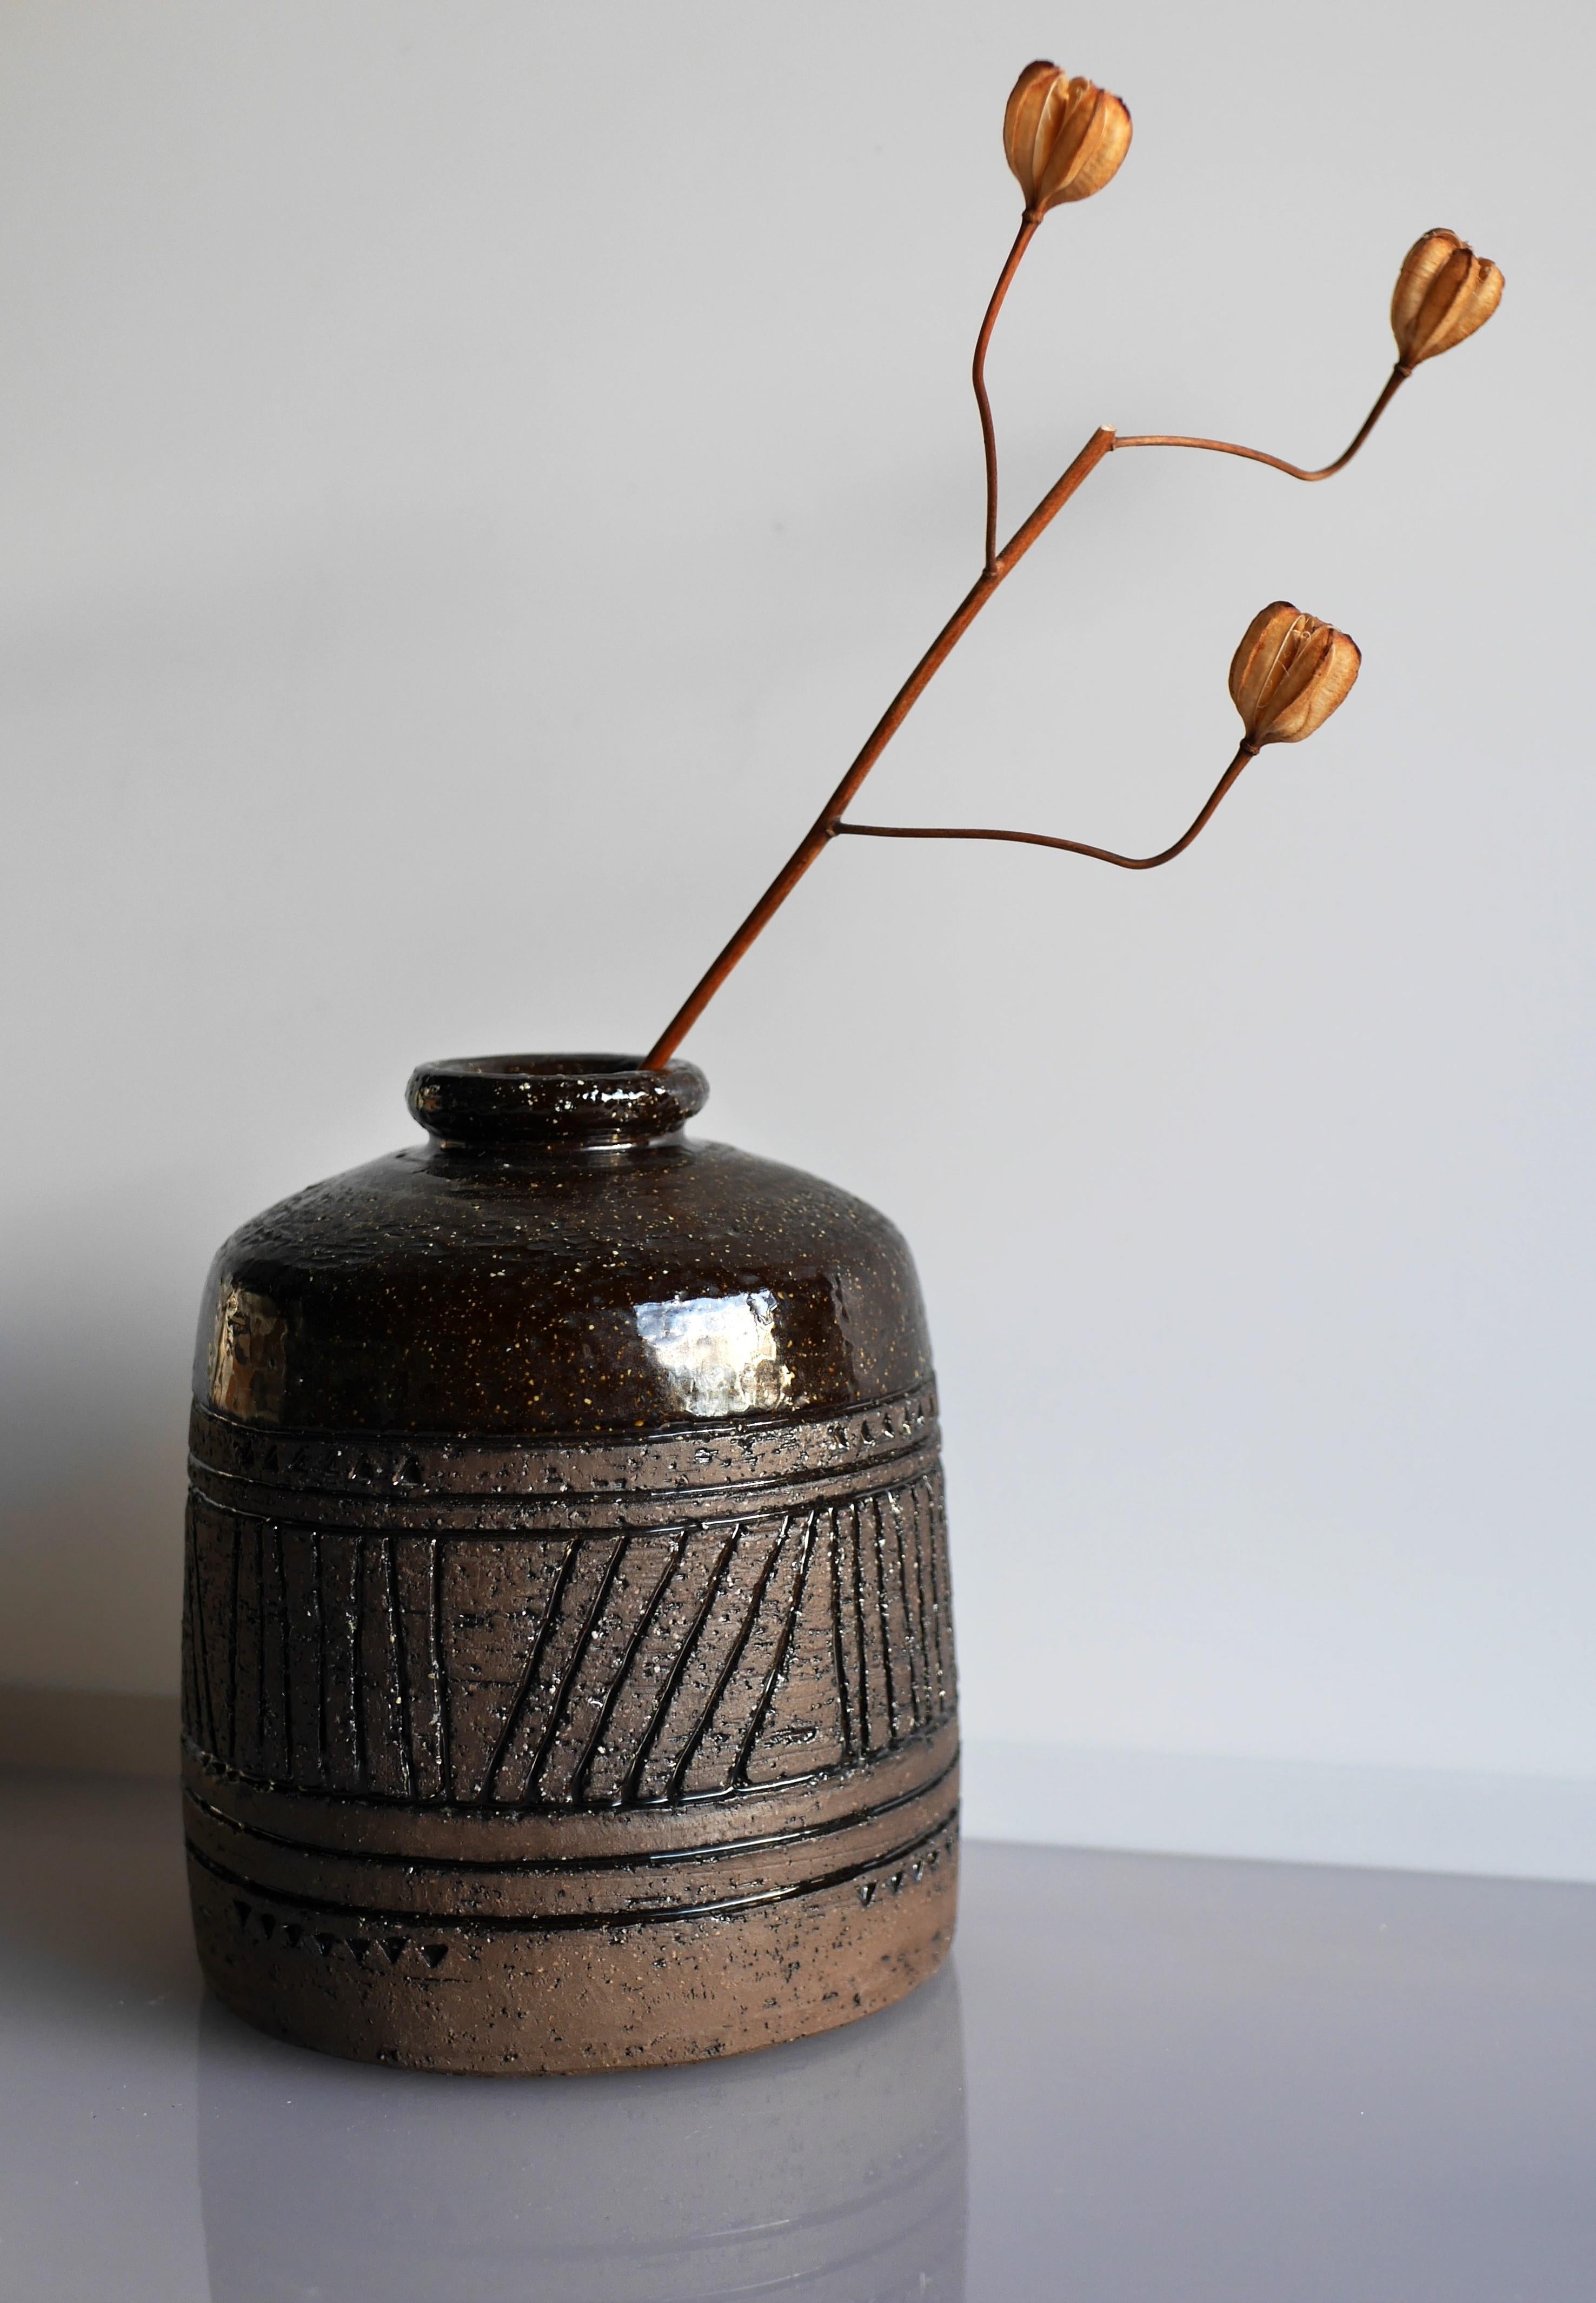 A stunning, dark, heavy piece from Inger Persson for Rörstrand, Sweden. A dark brown earthenware base with a primitive style of pattern with lines and triangles scored around the sides. The shoulders and neck have a deep brown glaze. As usual from